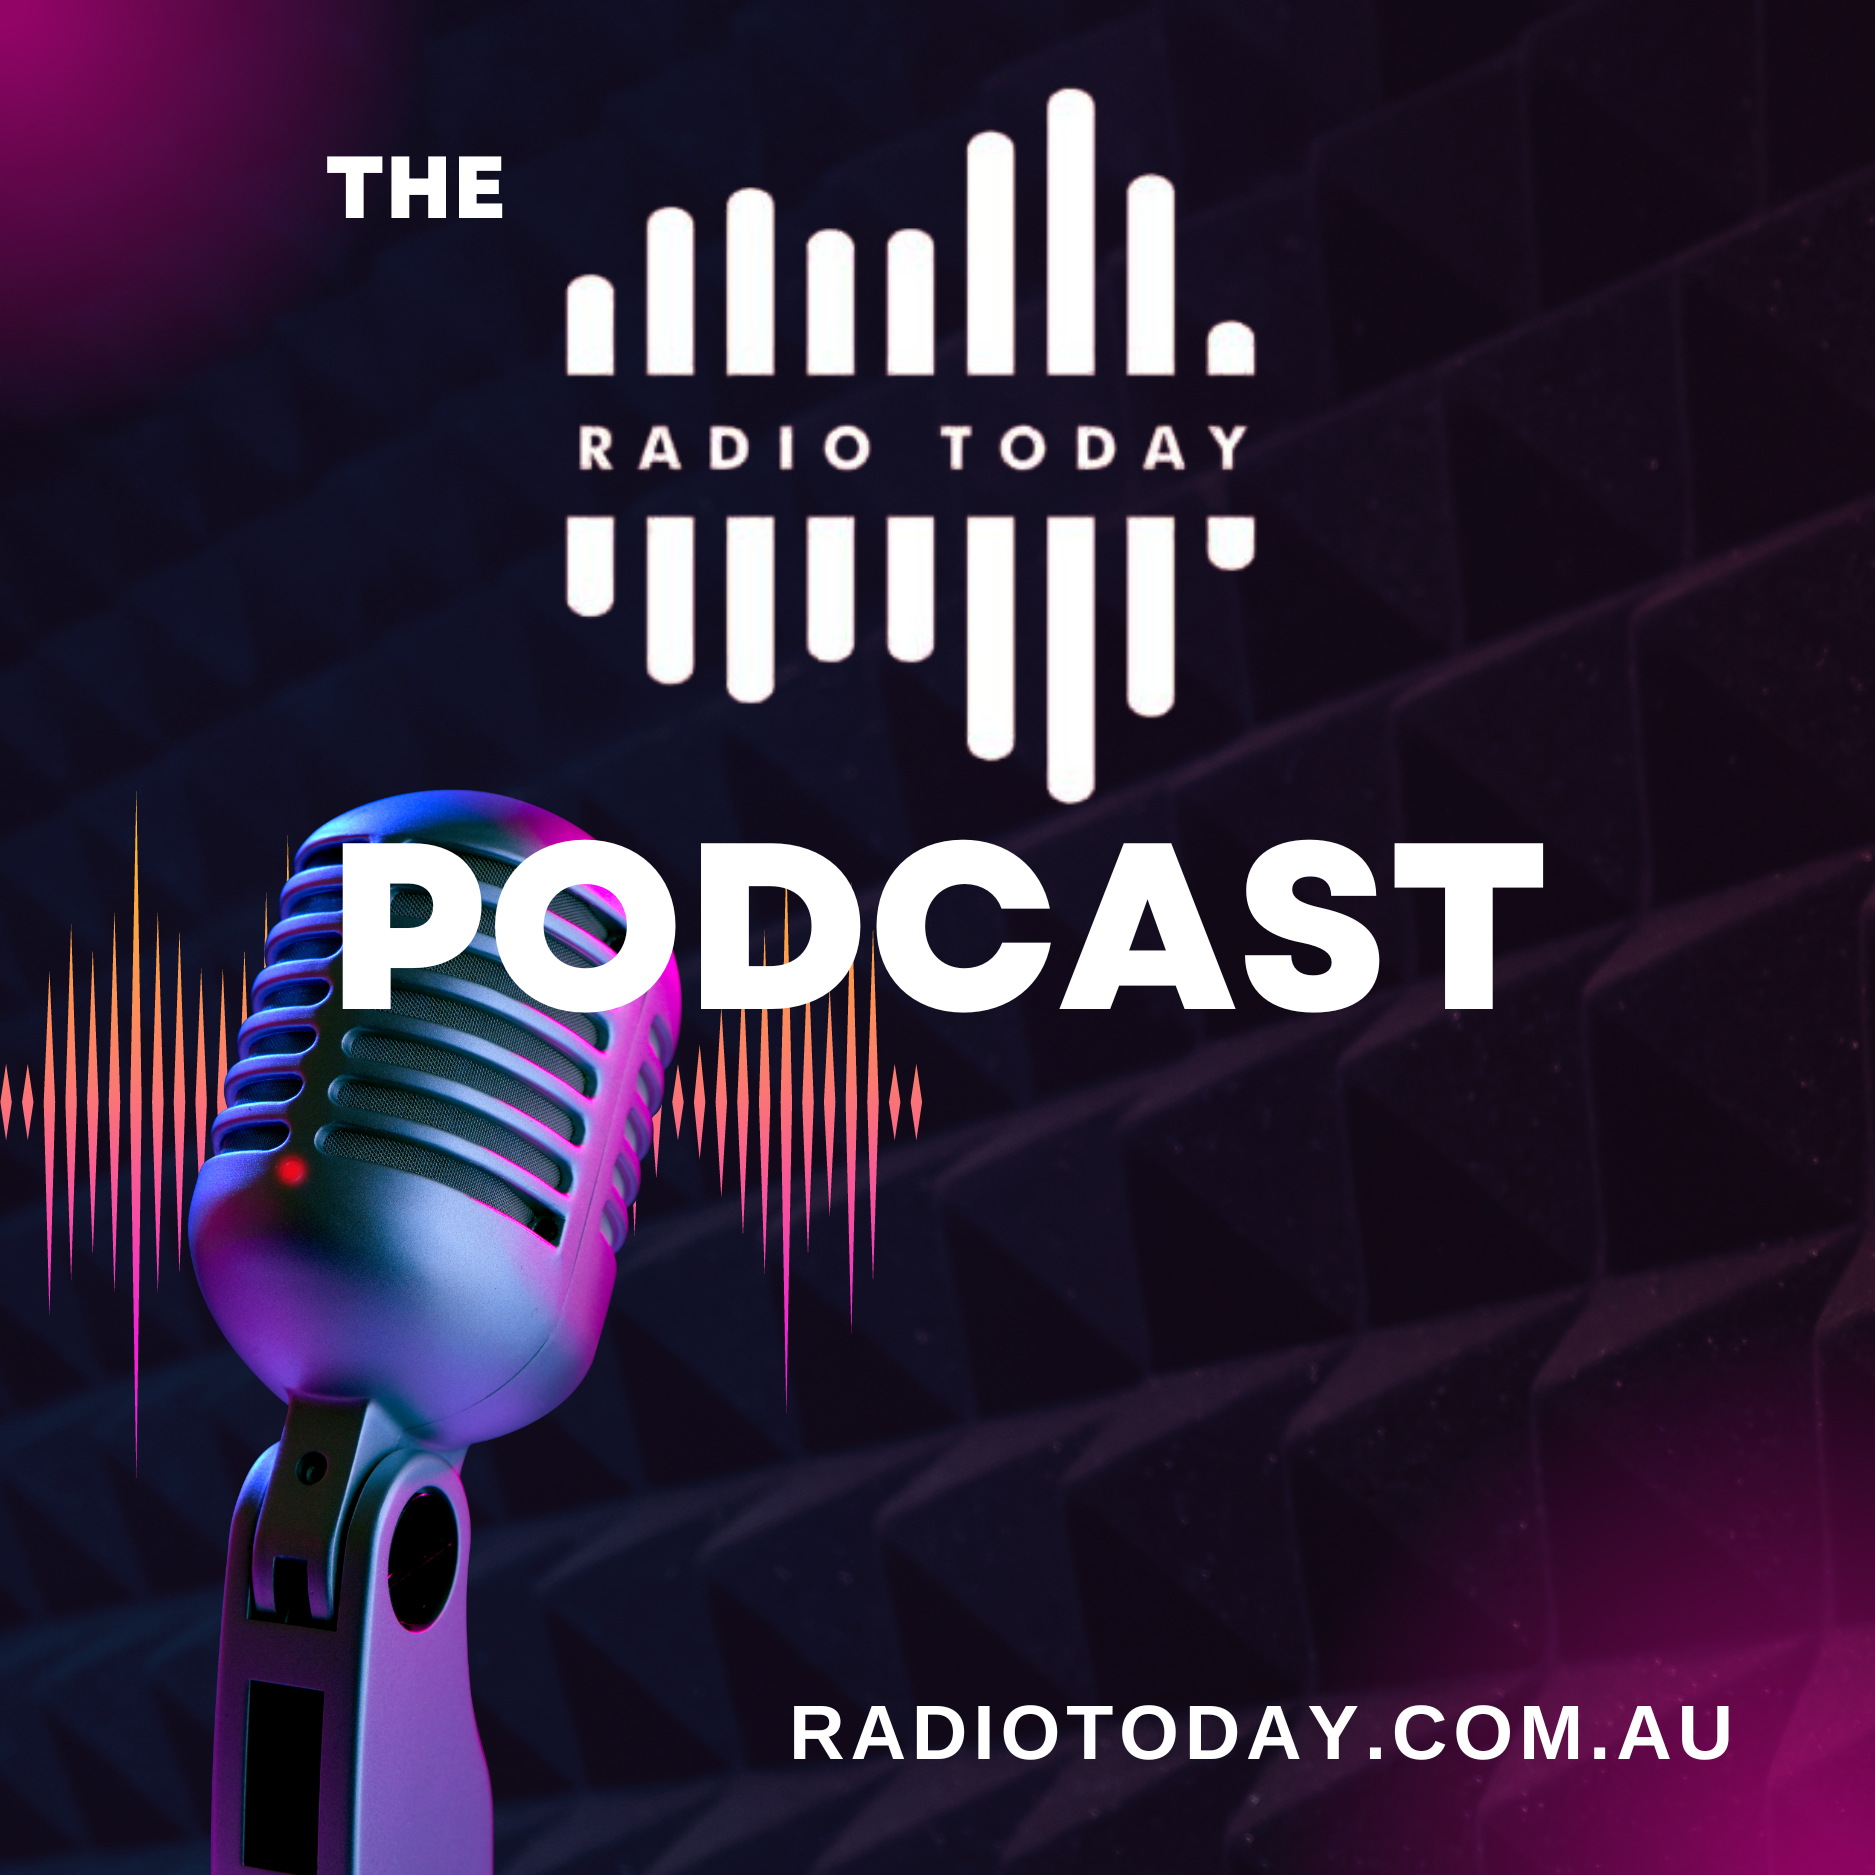 Radio Today: Xtra Insights Survey of the Illawarra has i98 on top, More Than Just Fireworks at HIt and Mix in Canberra + More!